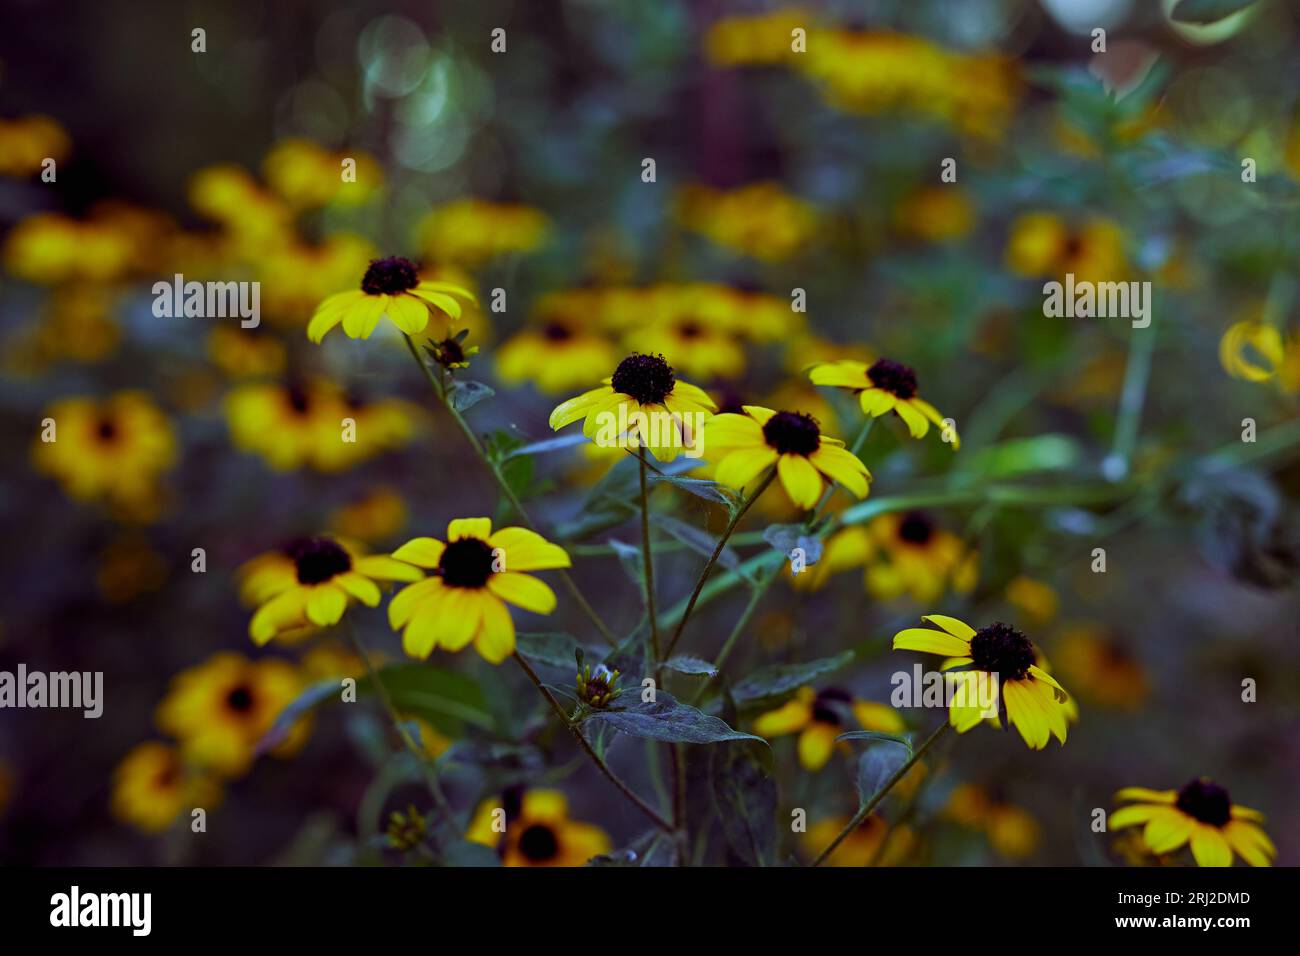 Flowers Rudbeckia triloba with blurred background. Brown eyed Susan flowers. Stock Photo